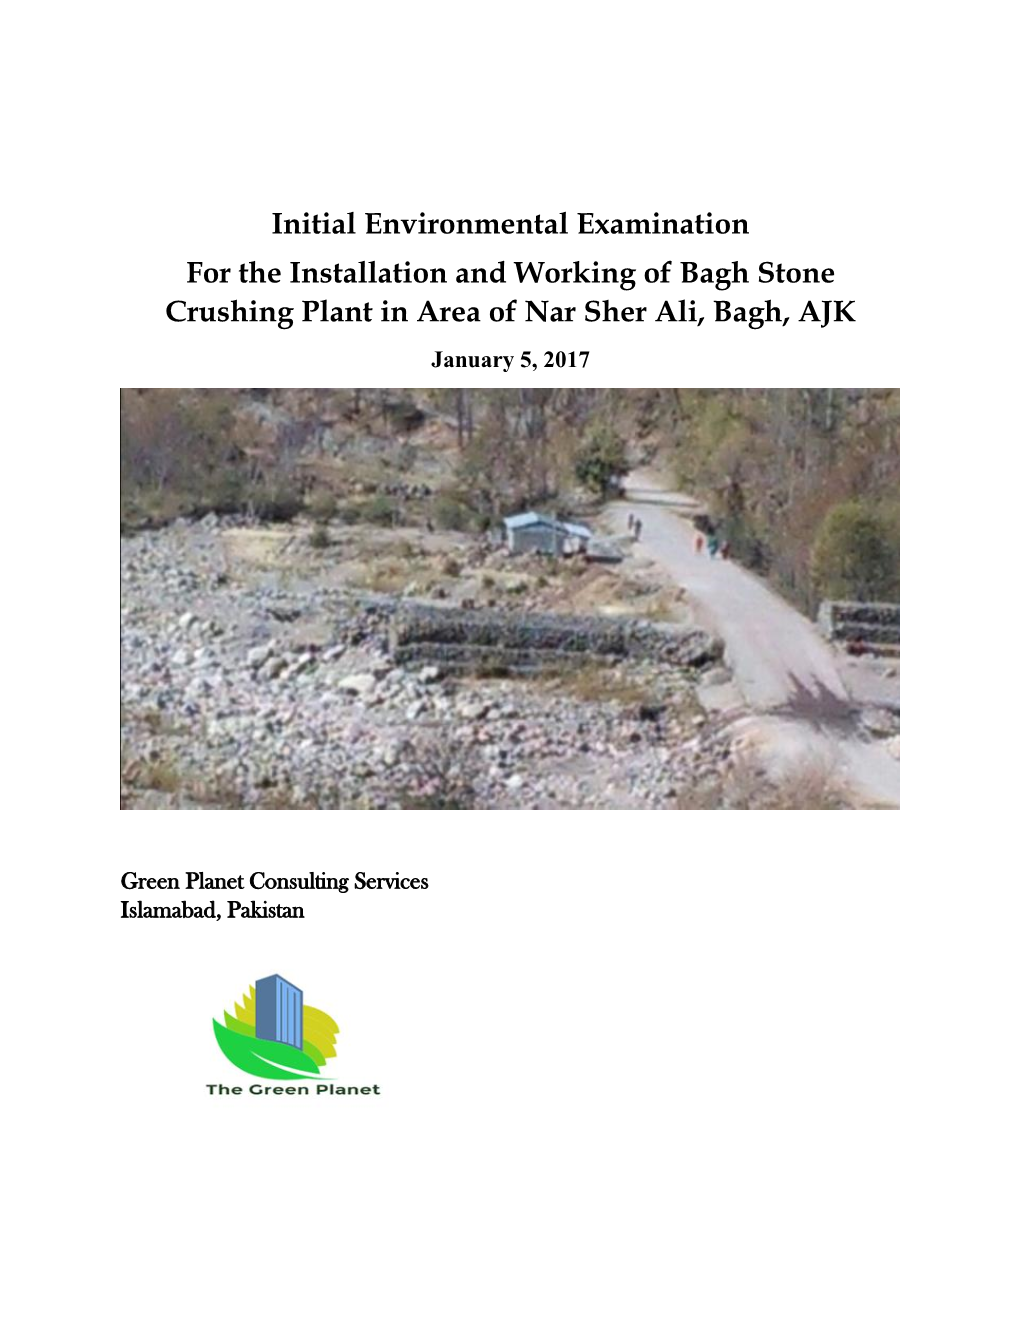 Initial Environmental Examination for the Installation and Working of Bagh Stone Crushing Plant in Area of Nar Sher Ali, Bagh, AJK January 5, 2017